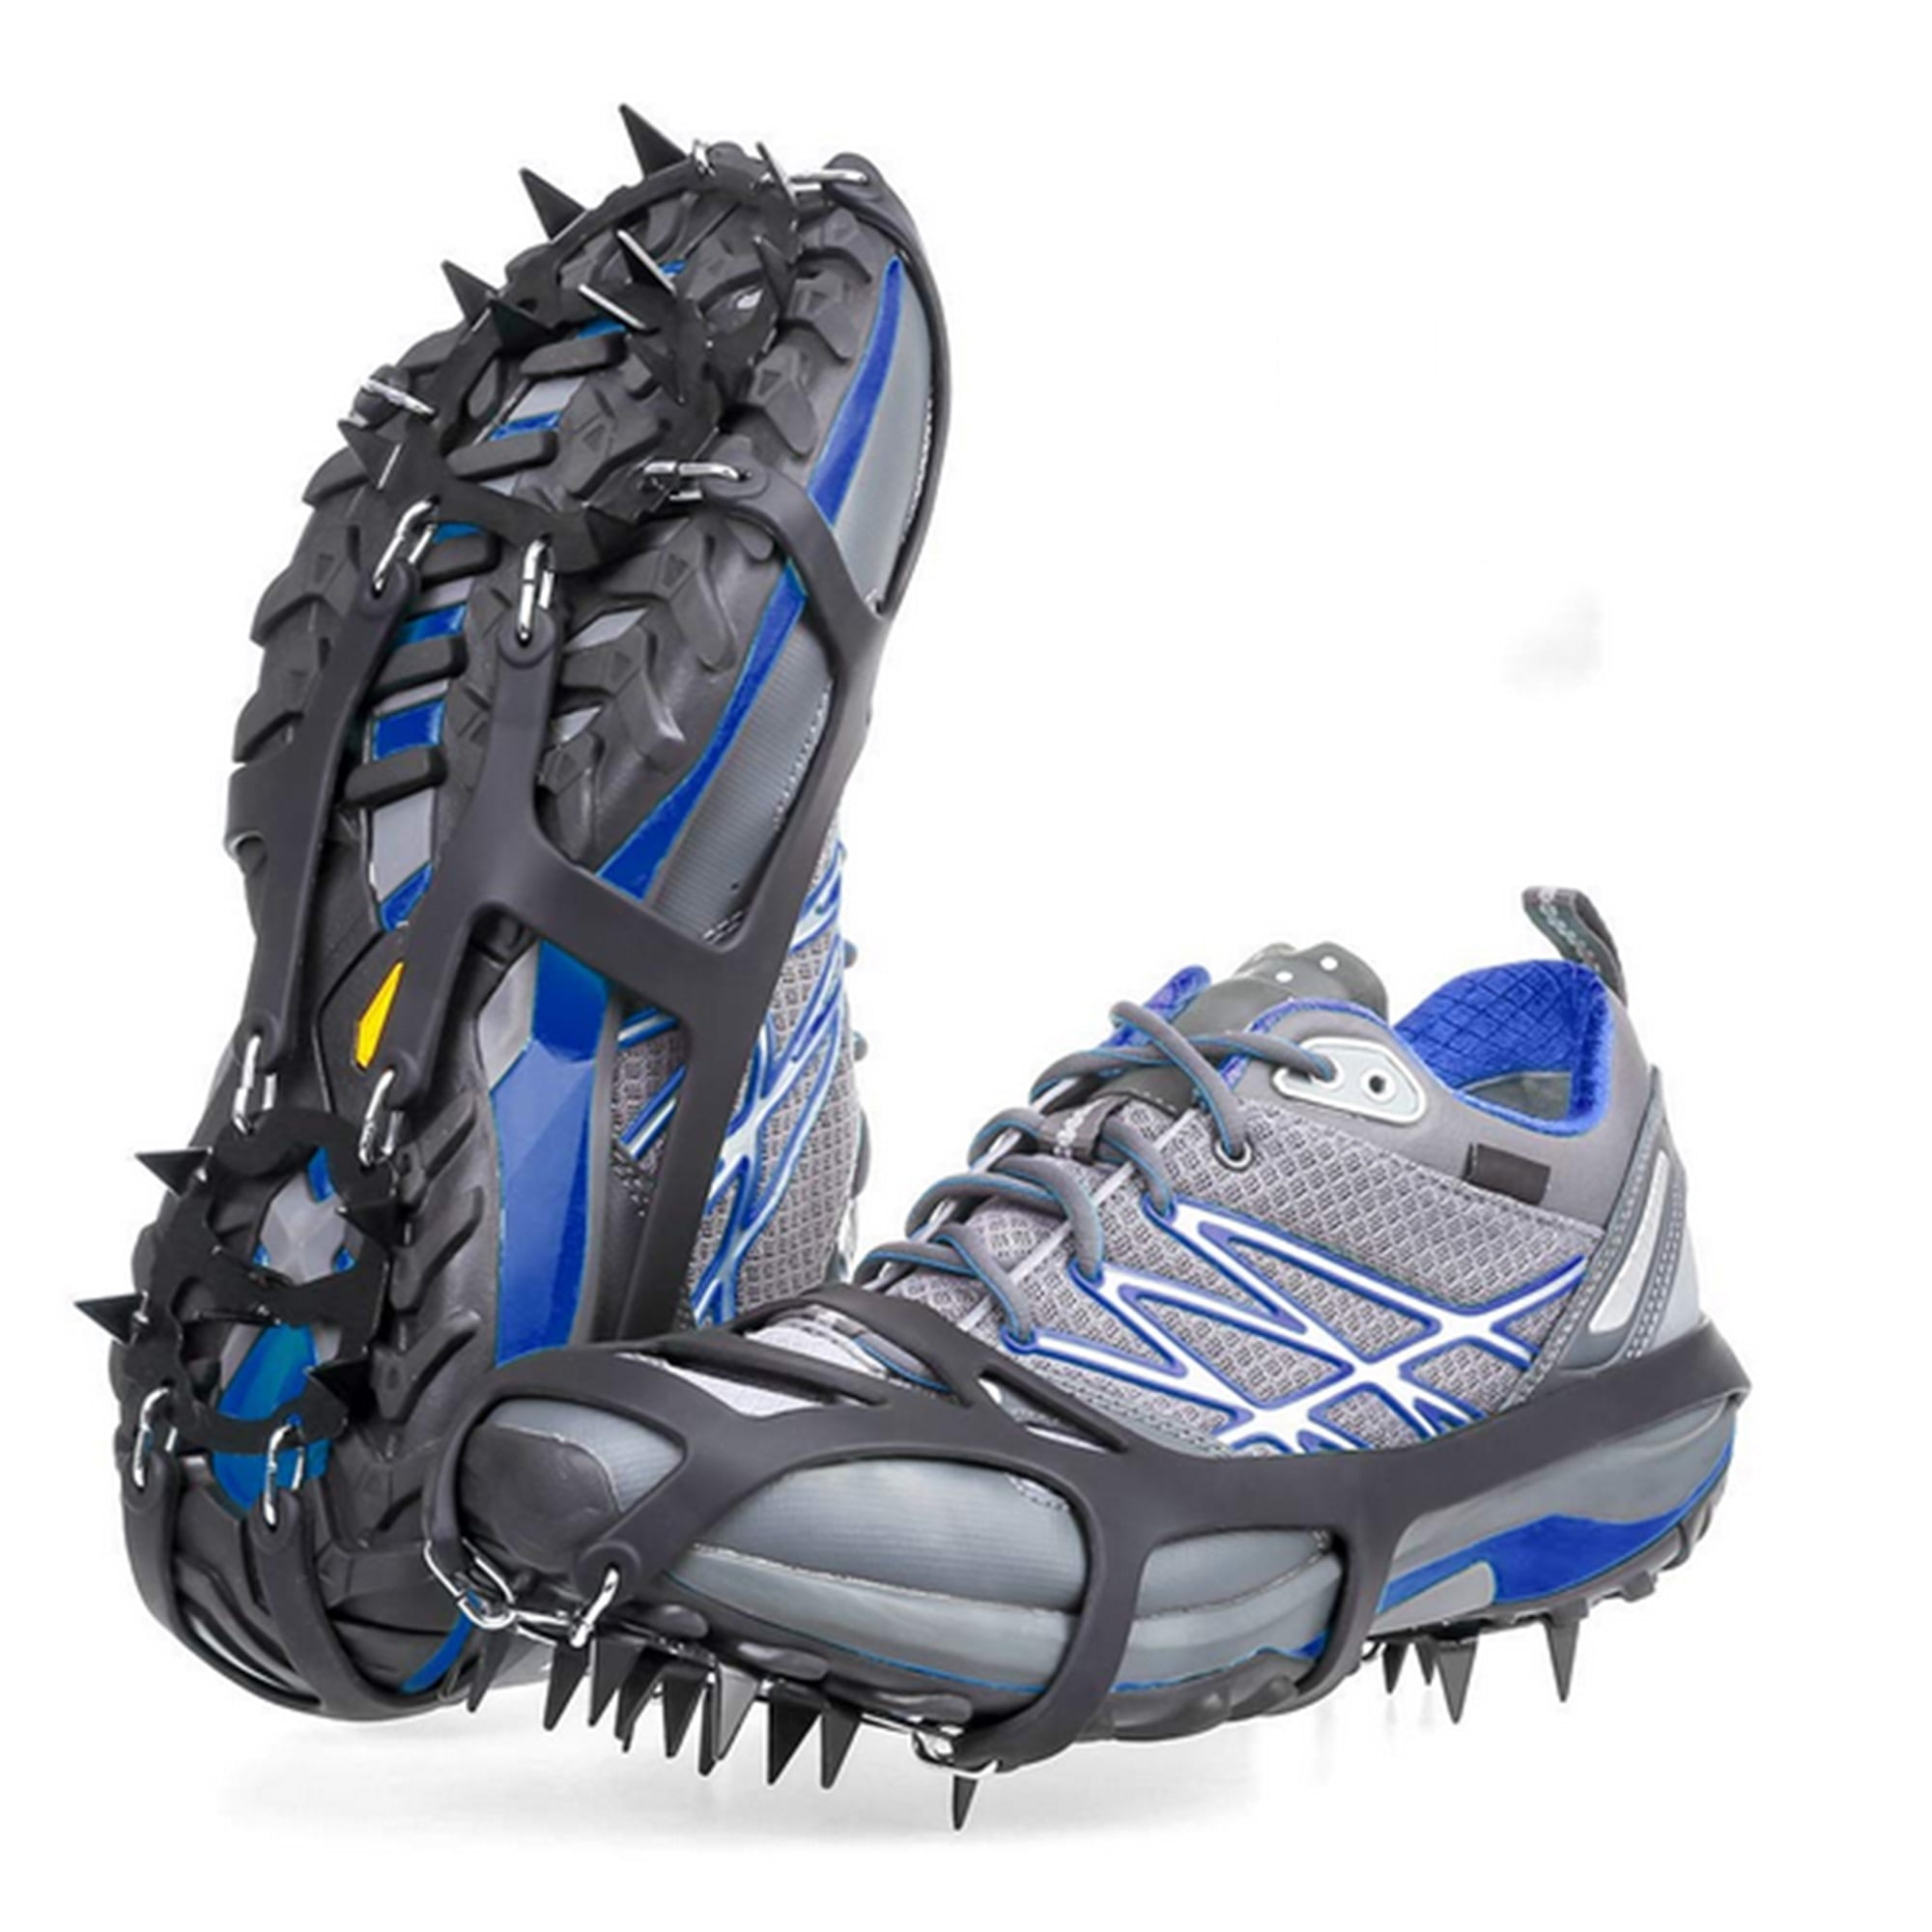 Details about  / Ice Grips High Tensile Steel 5 Teeth Anti-slip Shoes Crampons Cleats Boot Hiking